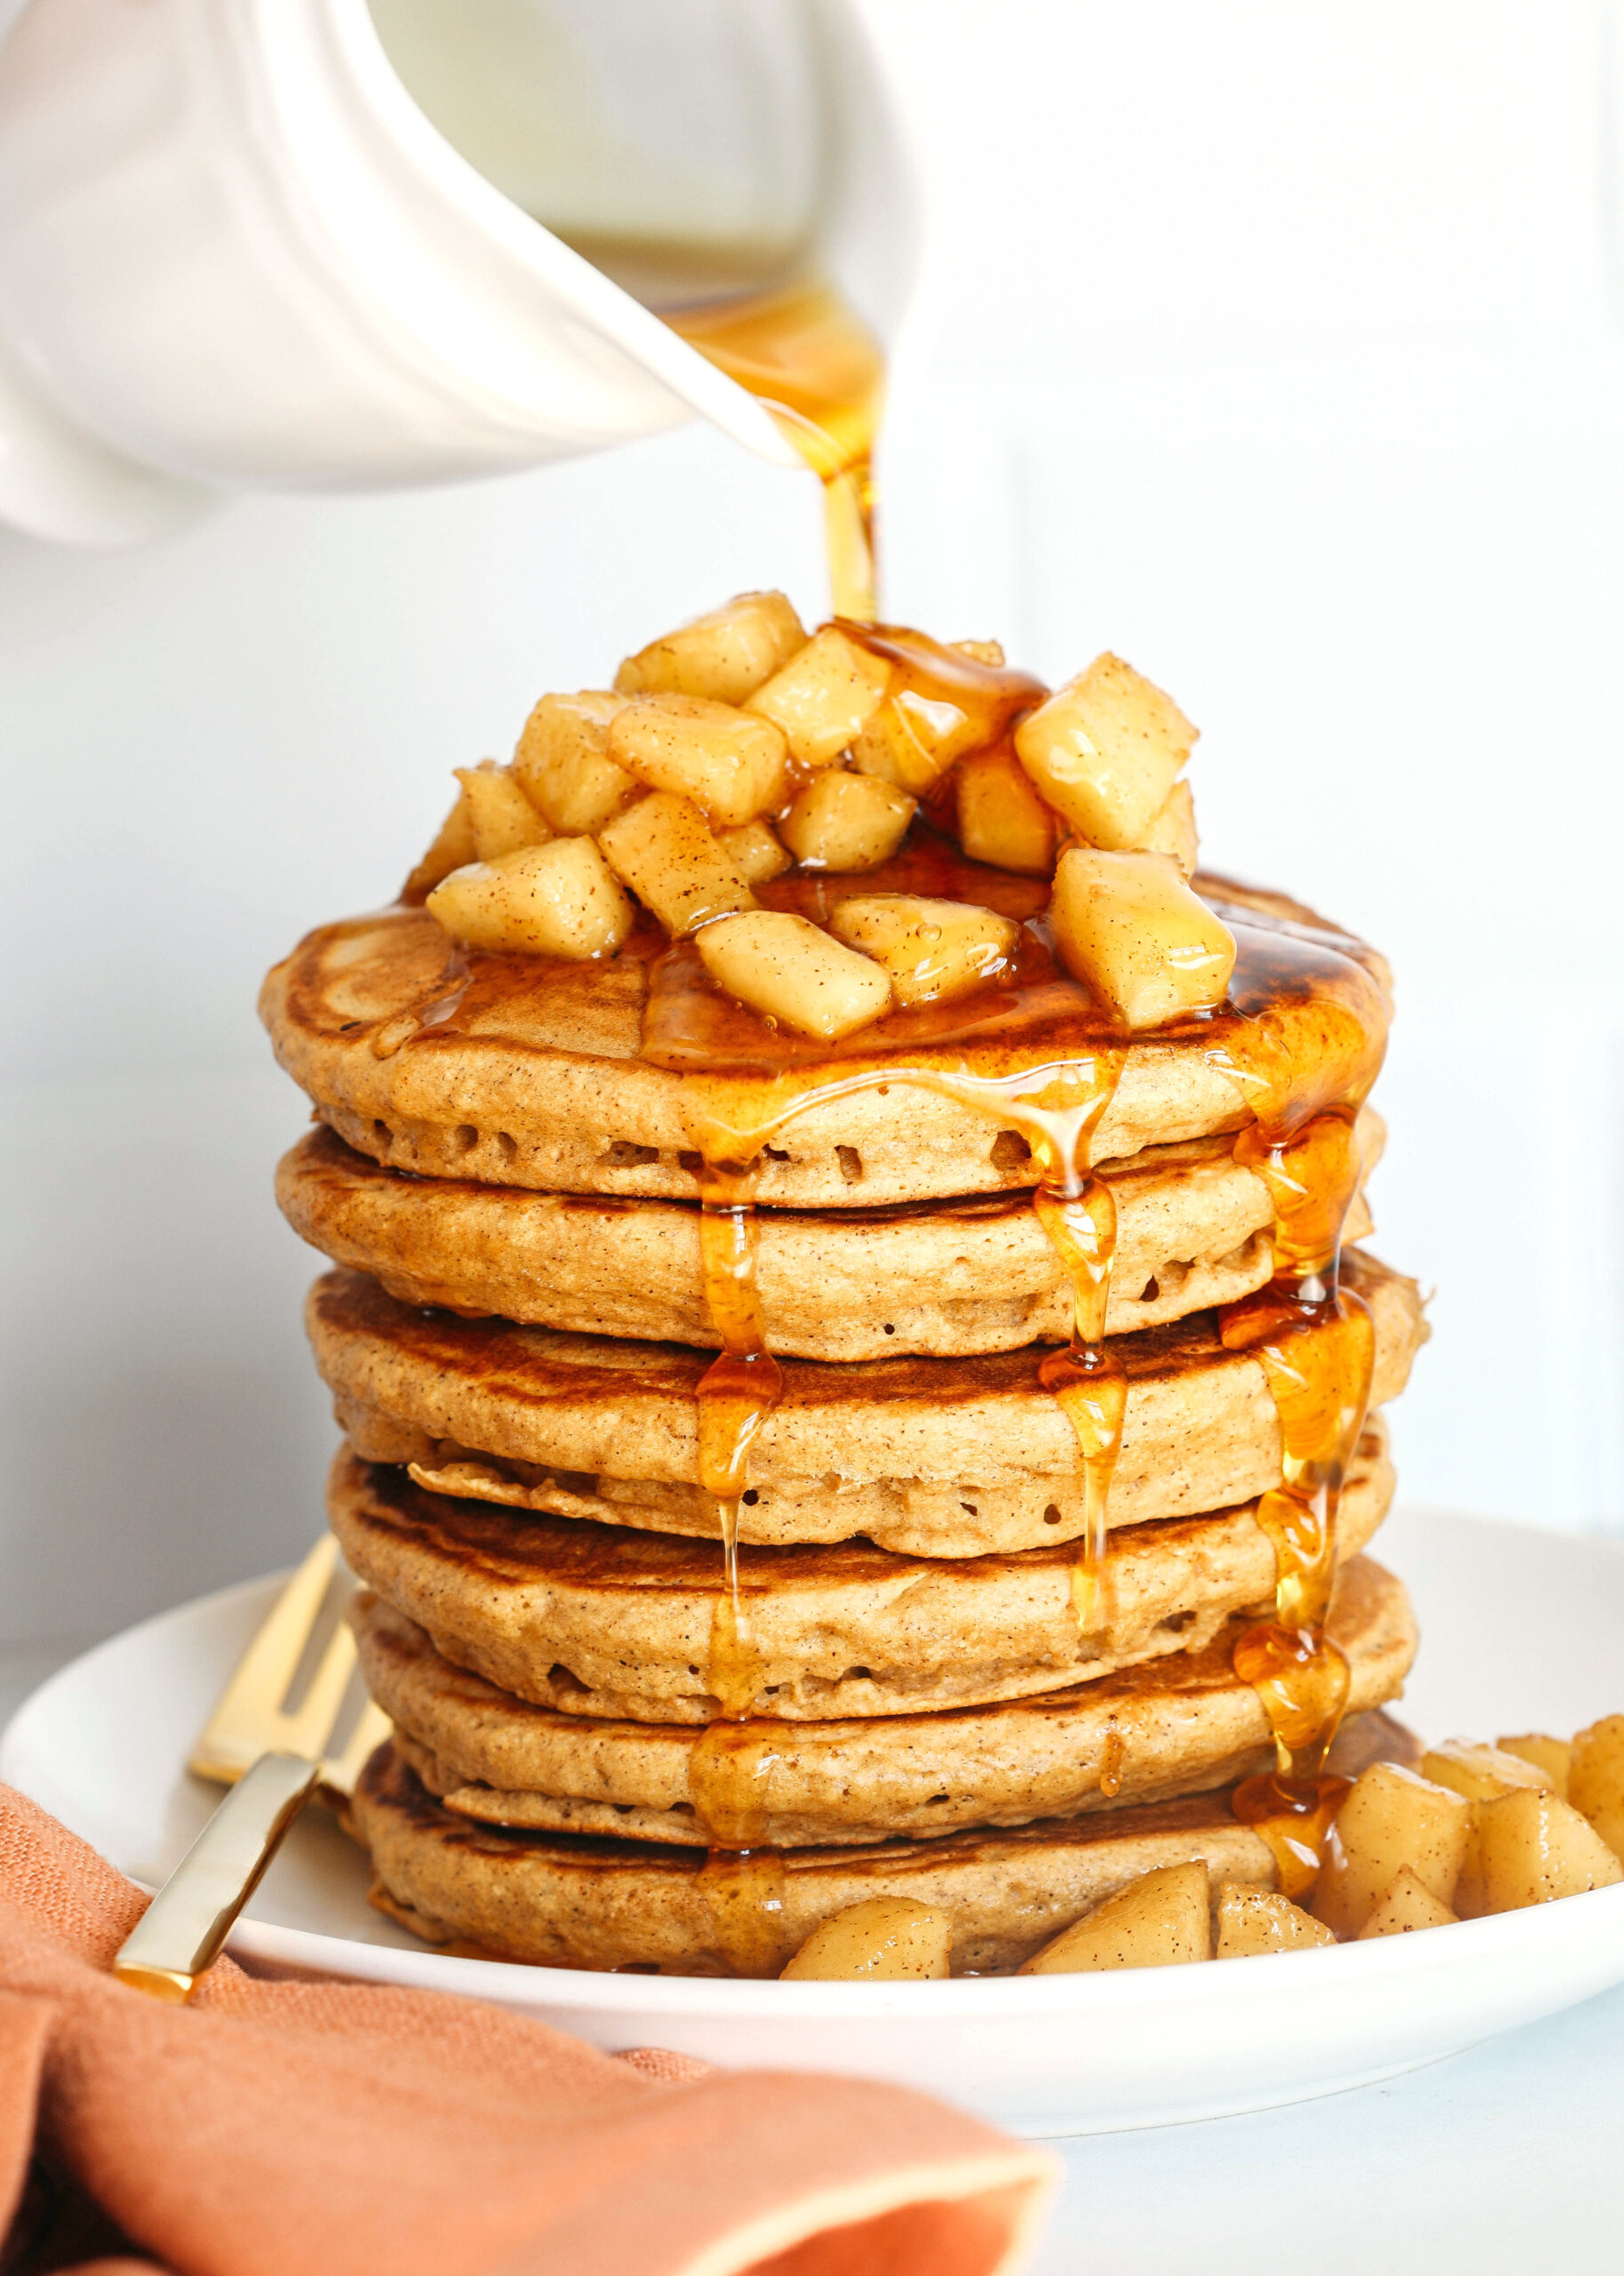 Light and fluffy Apple Cinnamon Pancakes made healthier with whole wheat flour, applesauce in place of oil and zero butter or refined sugar!  Topped with warm spiced apples and drizzled with maple syrup!